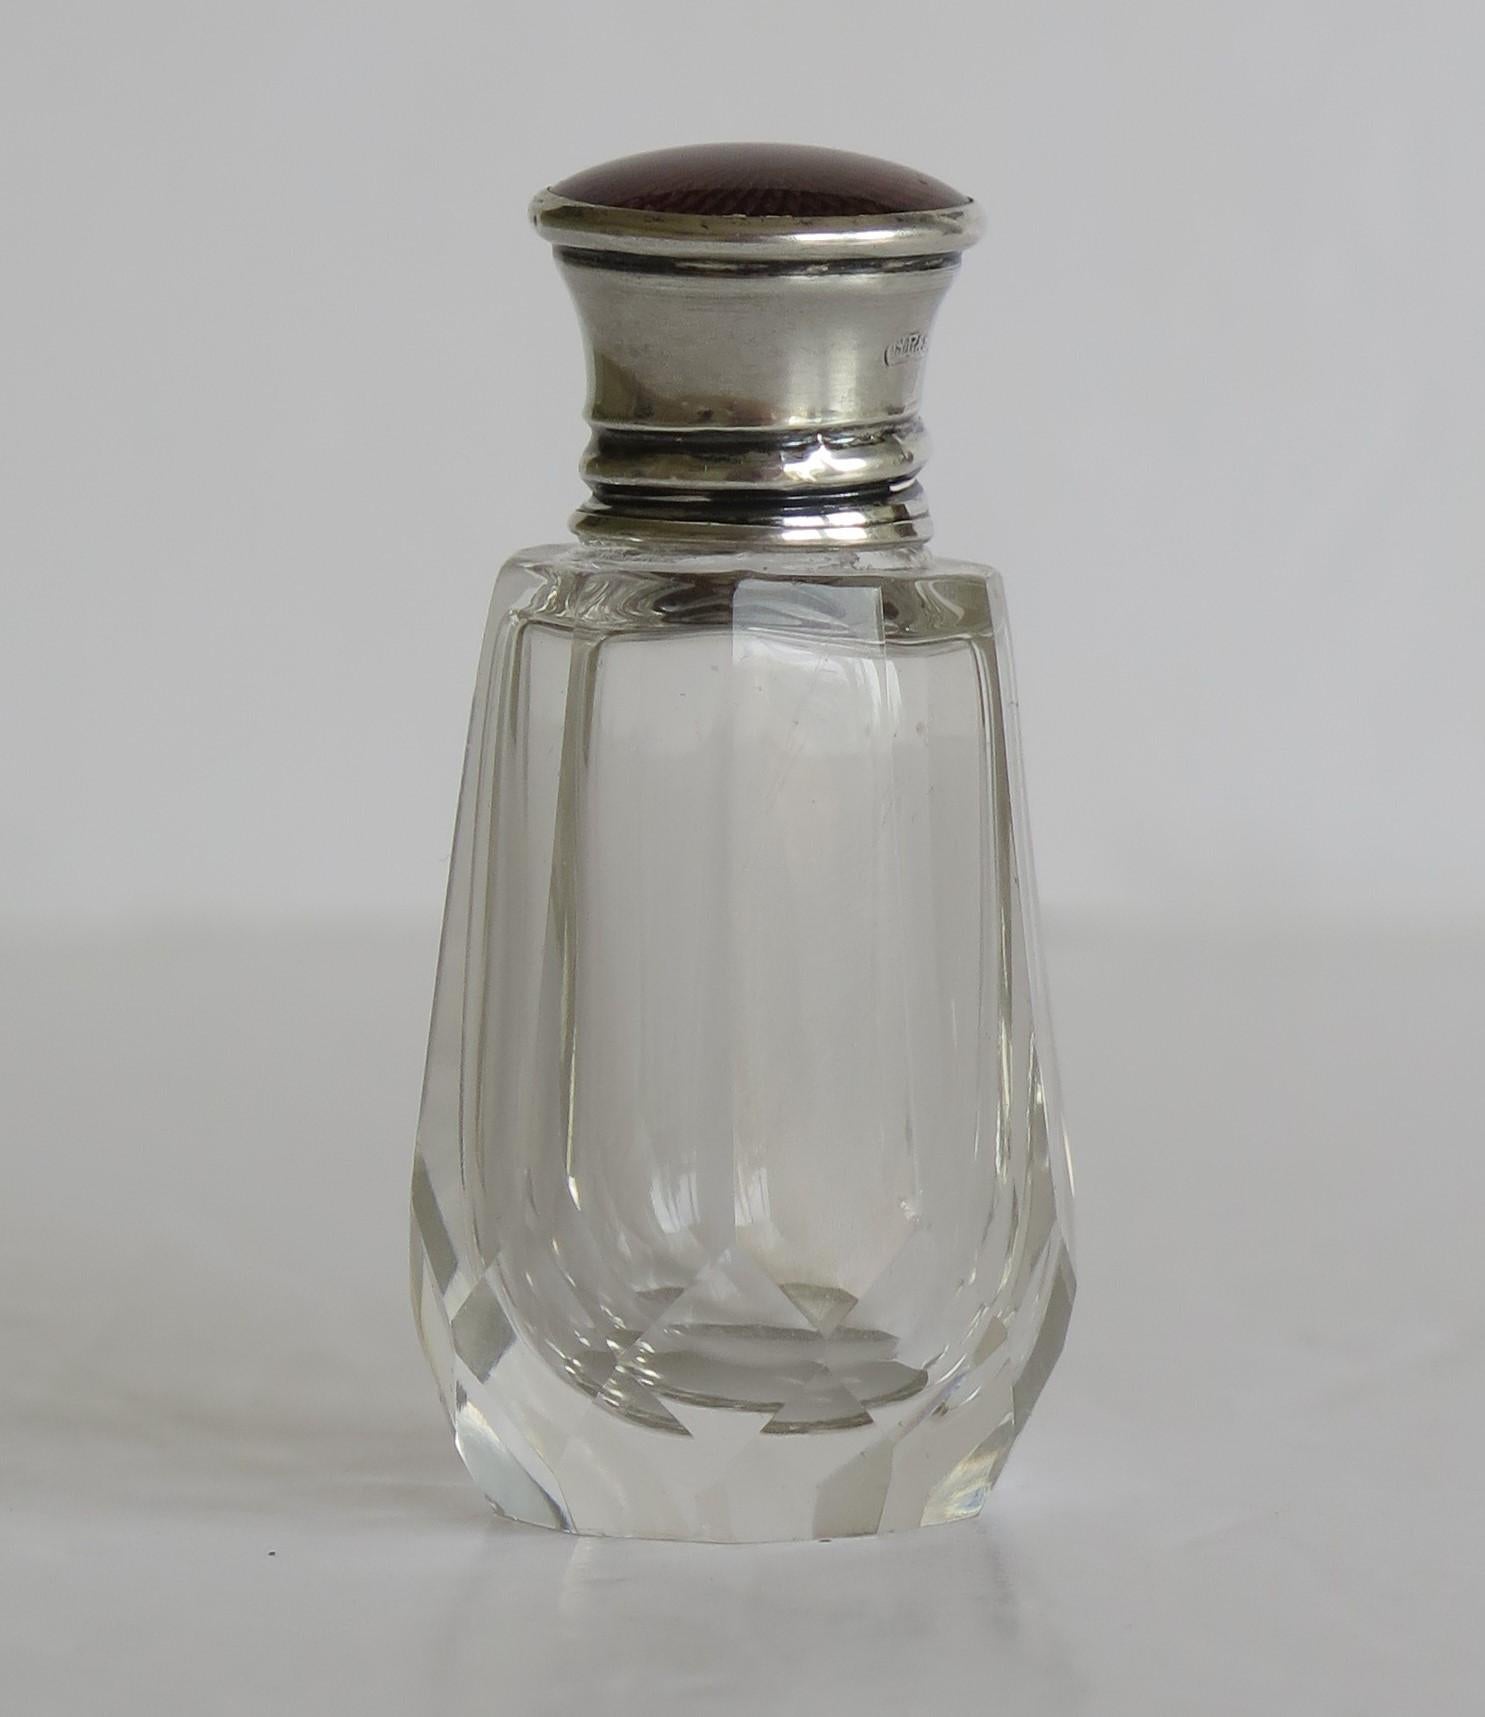 This is a beautiful scent, cologne or perfume cut glass bottle with a burgundy guilloche enamel and sterling silver topped screw top lid, 1921

The glass crystal bottle is beautifully hand cut with vertical flutes and further diamond facets around